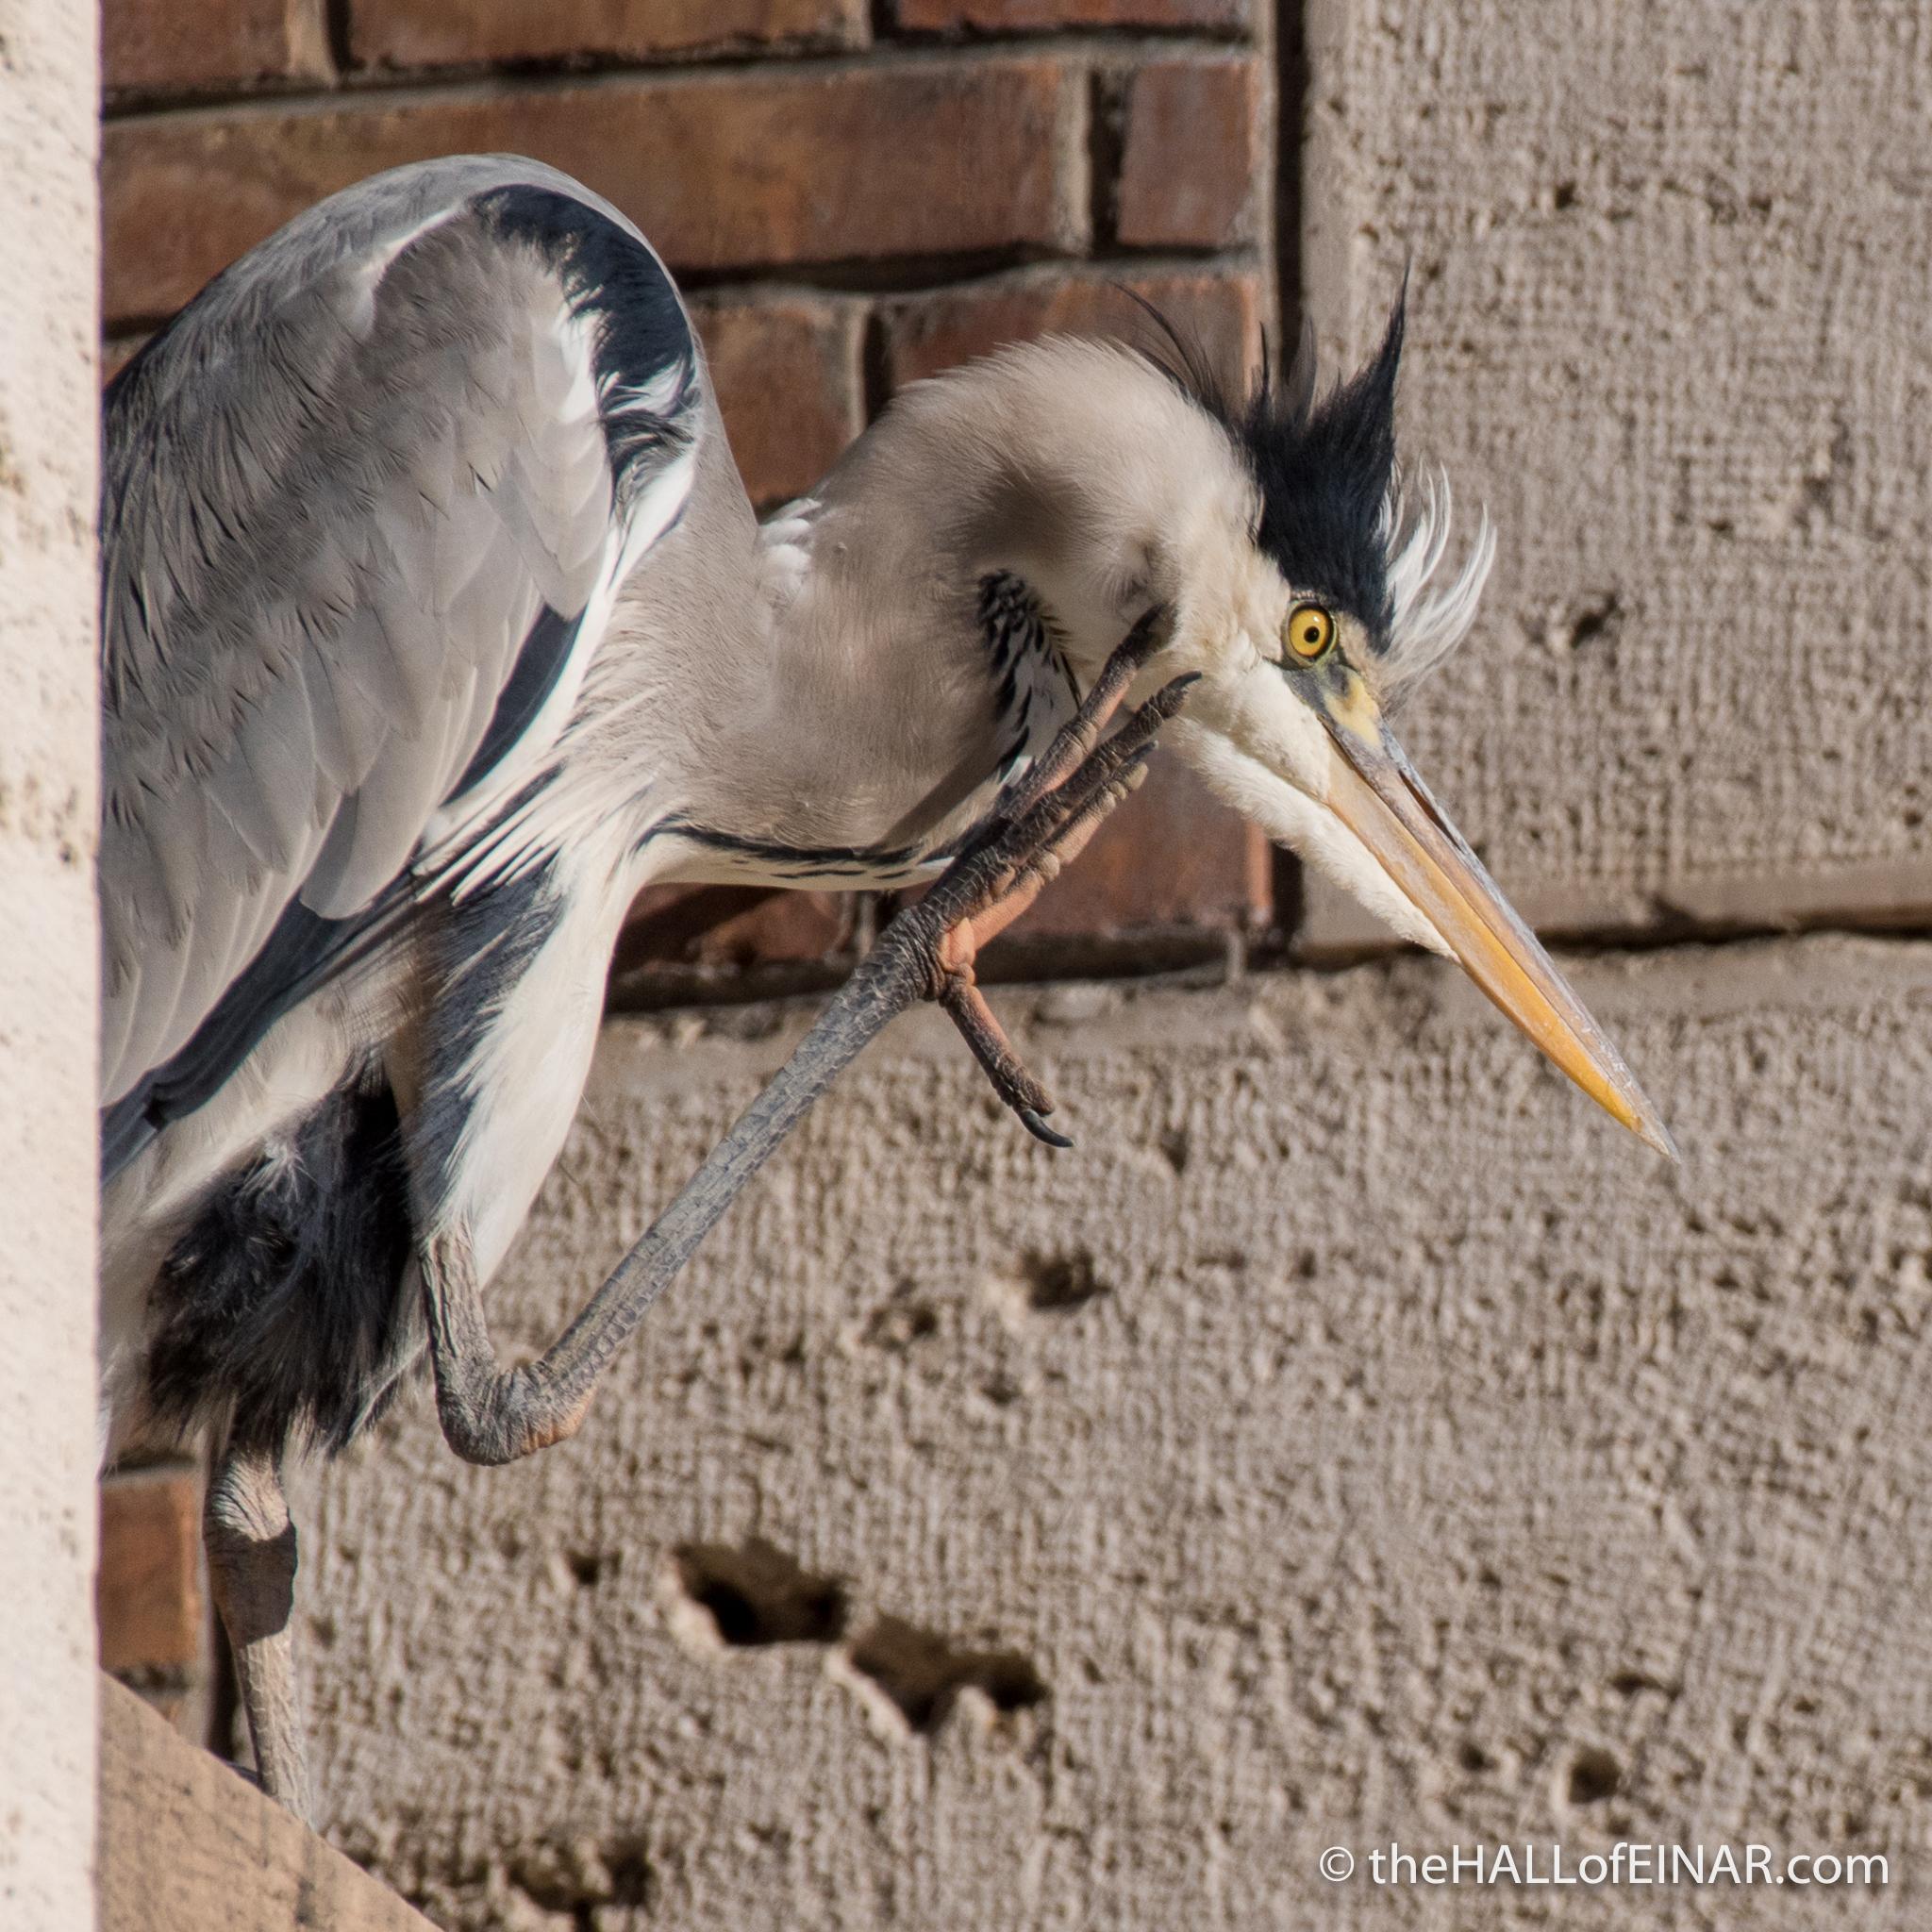 Heron on lungotevere - The Hall of Einar - photograph (c) David Bailey (not the)